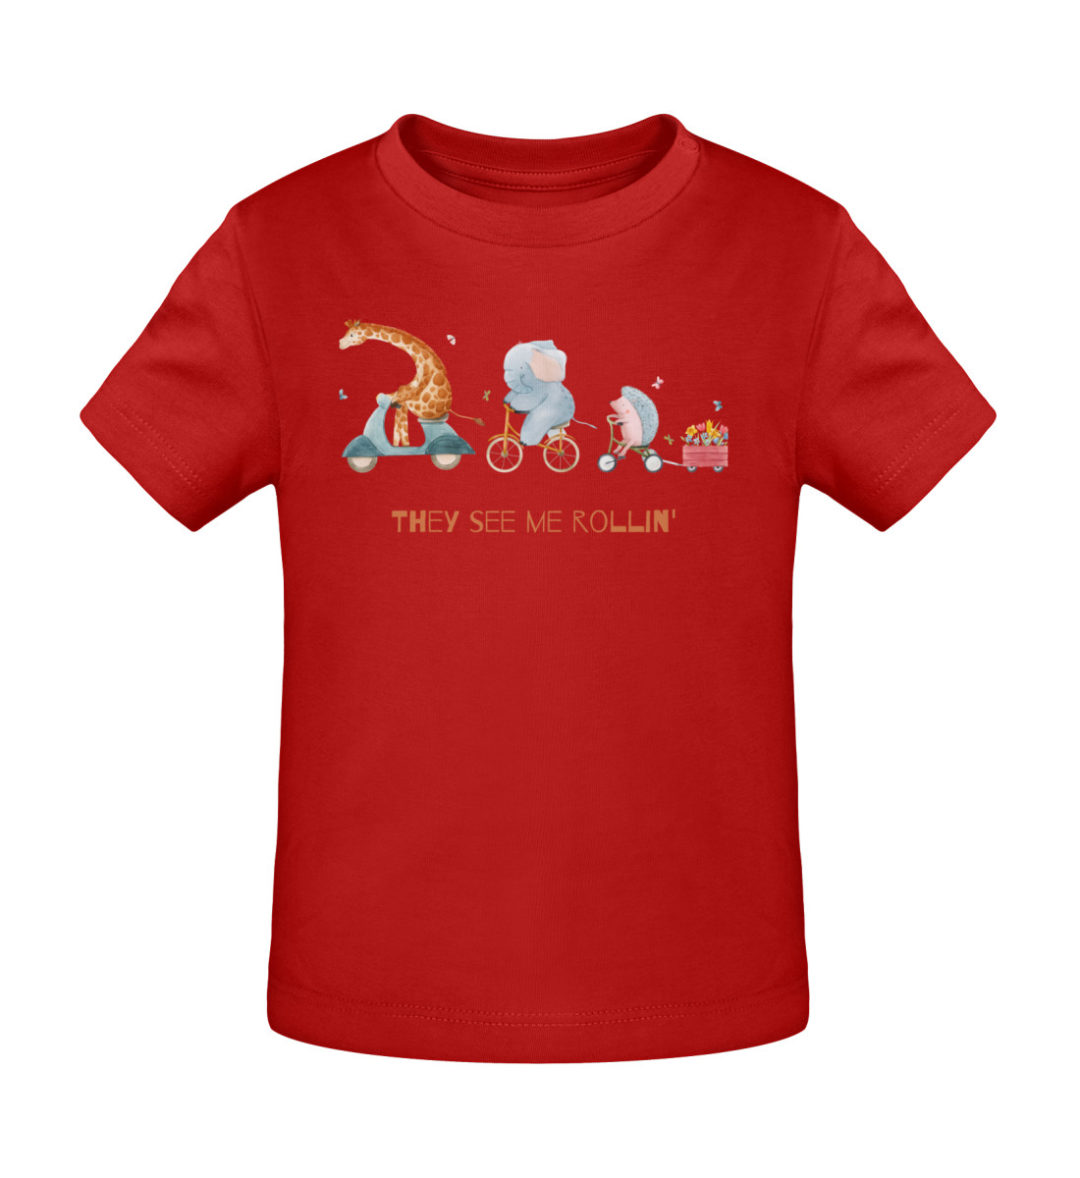 They see me rollin- - Baby Creator T-Shirt ST/ST-4